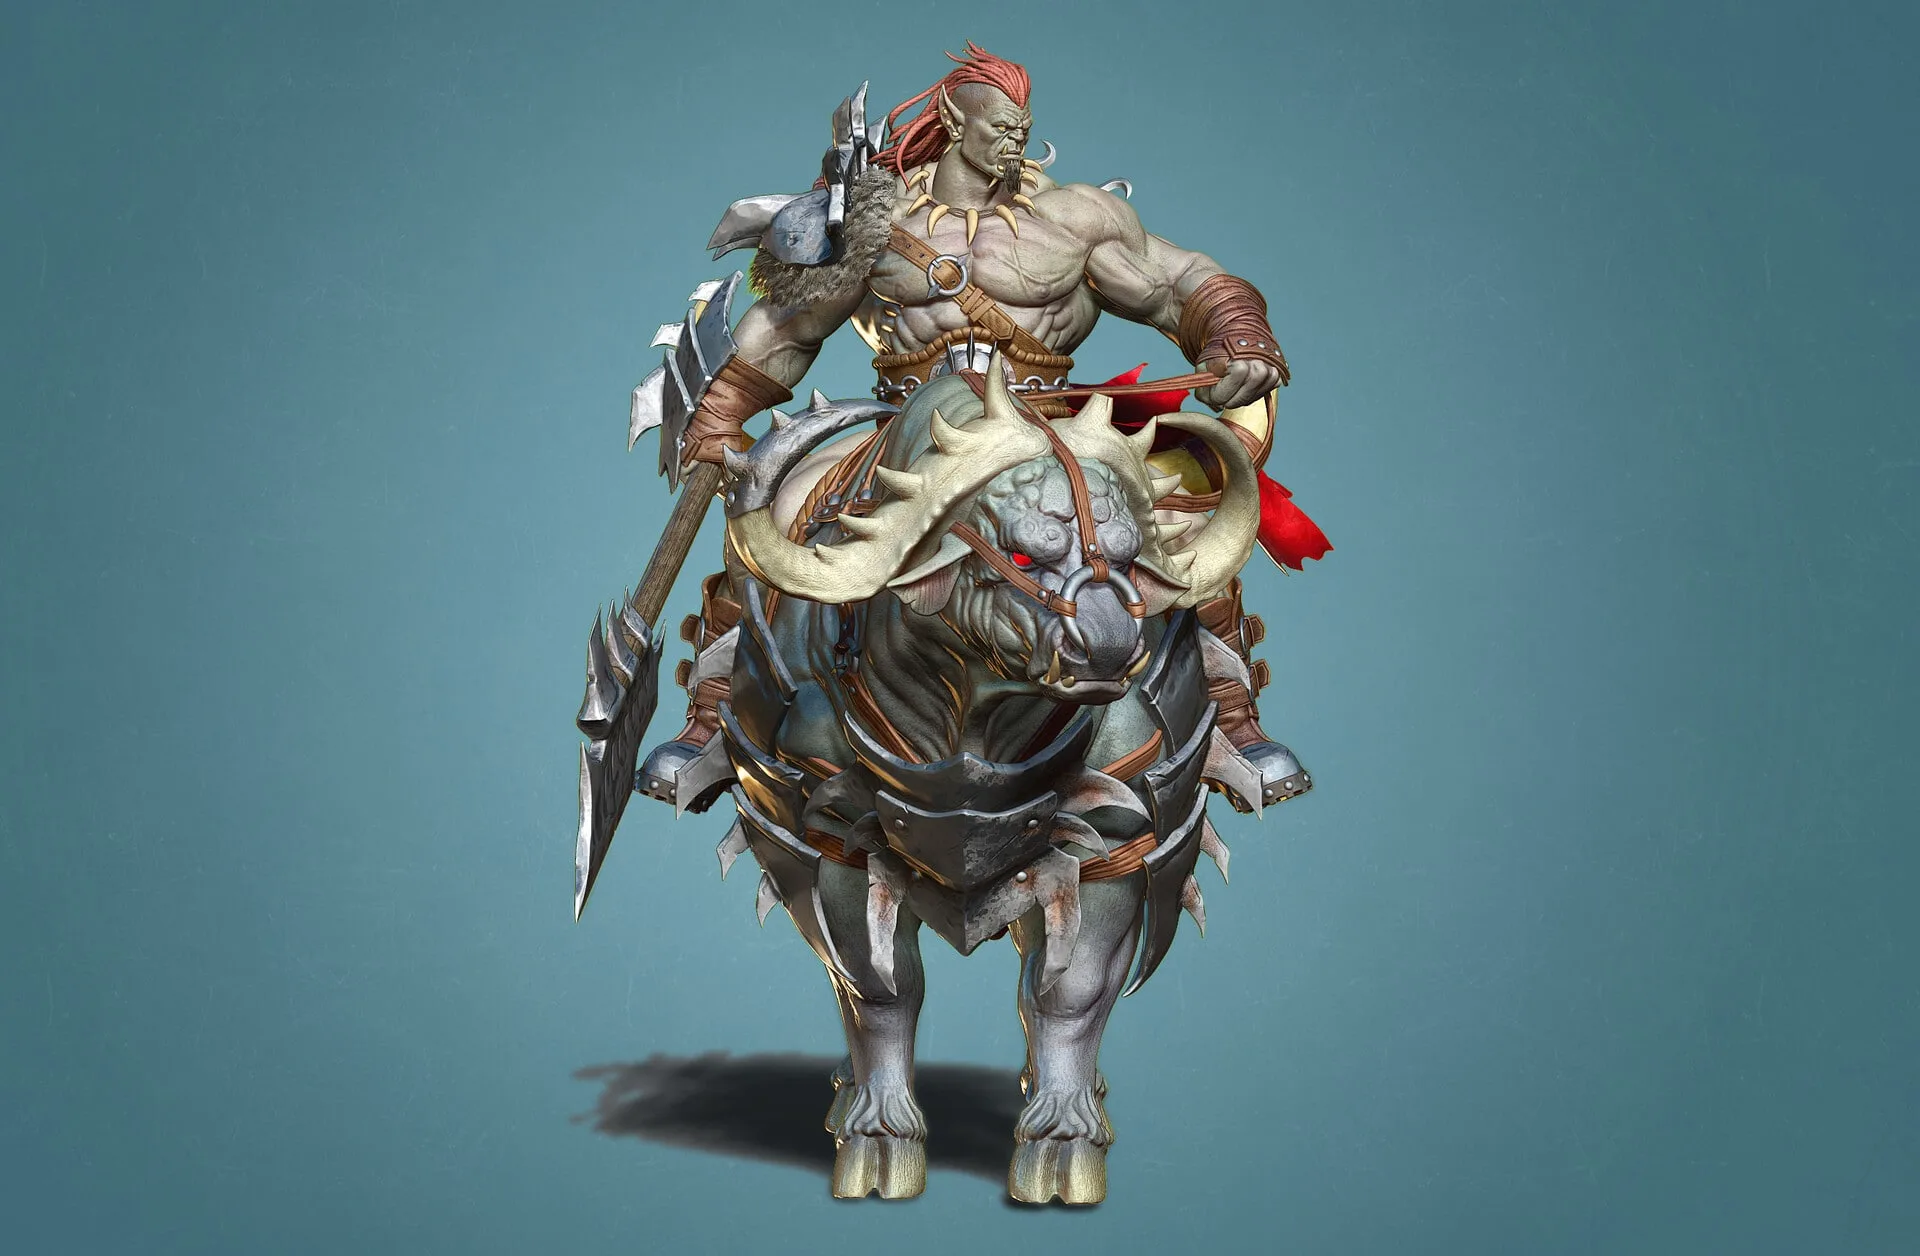 Orc Rider & Bull Creature Creation In Zbrush